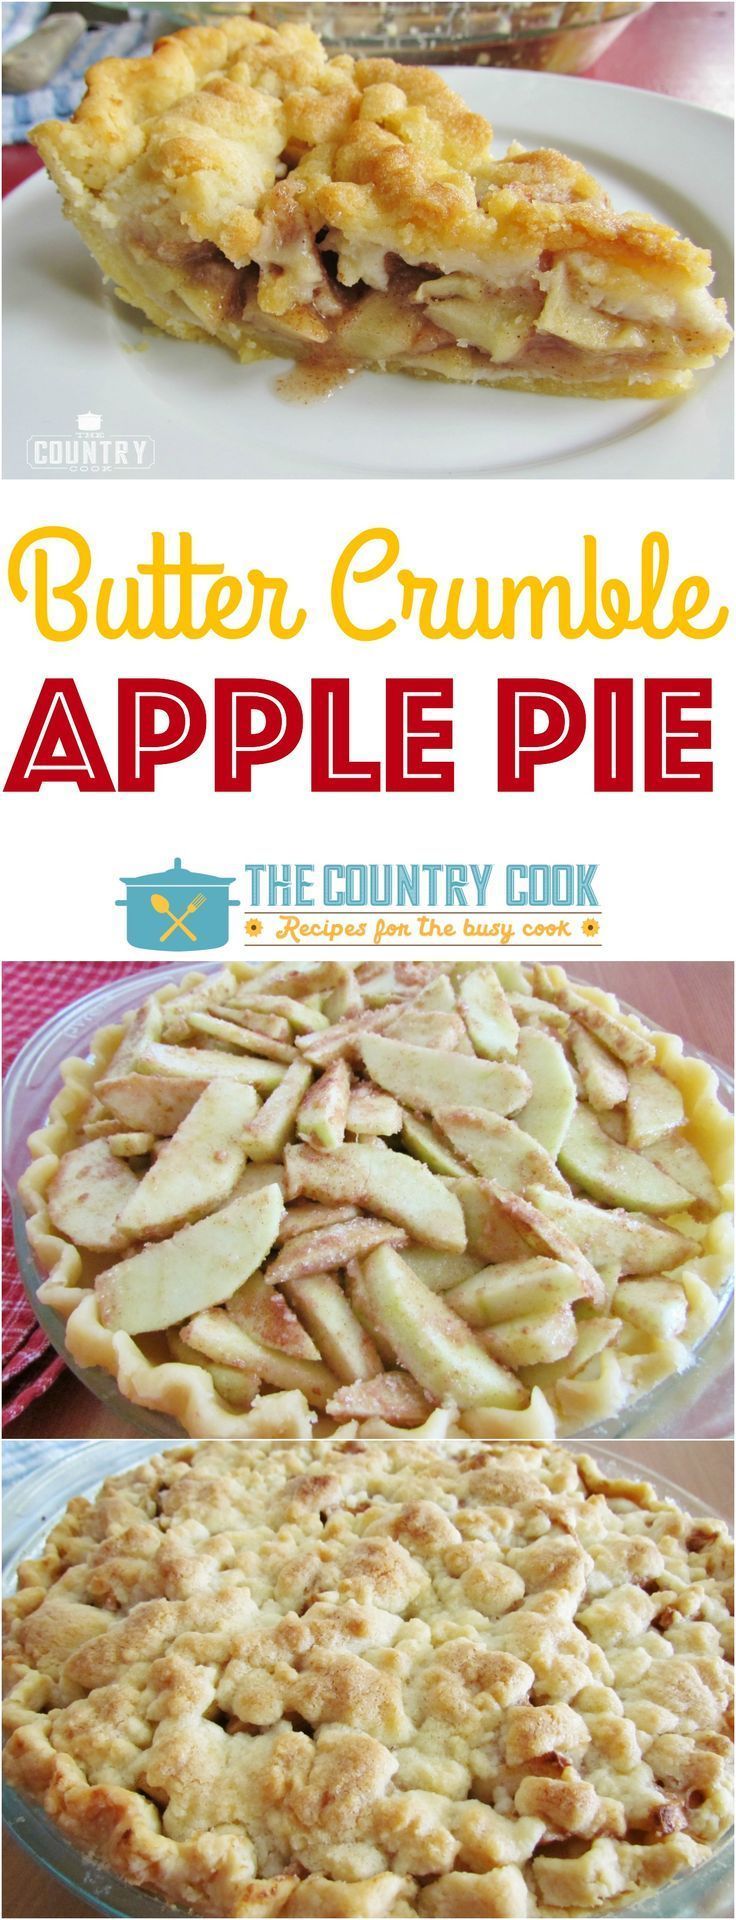 Butter Crumble Apple Pie recipe from The Country Cook. Best apple pie ever!